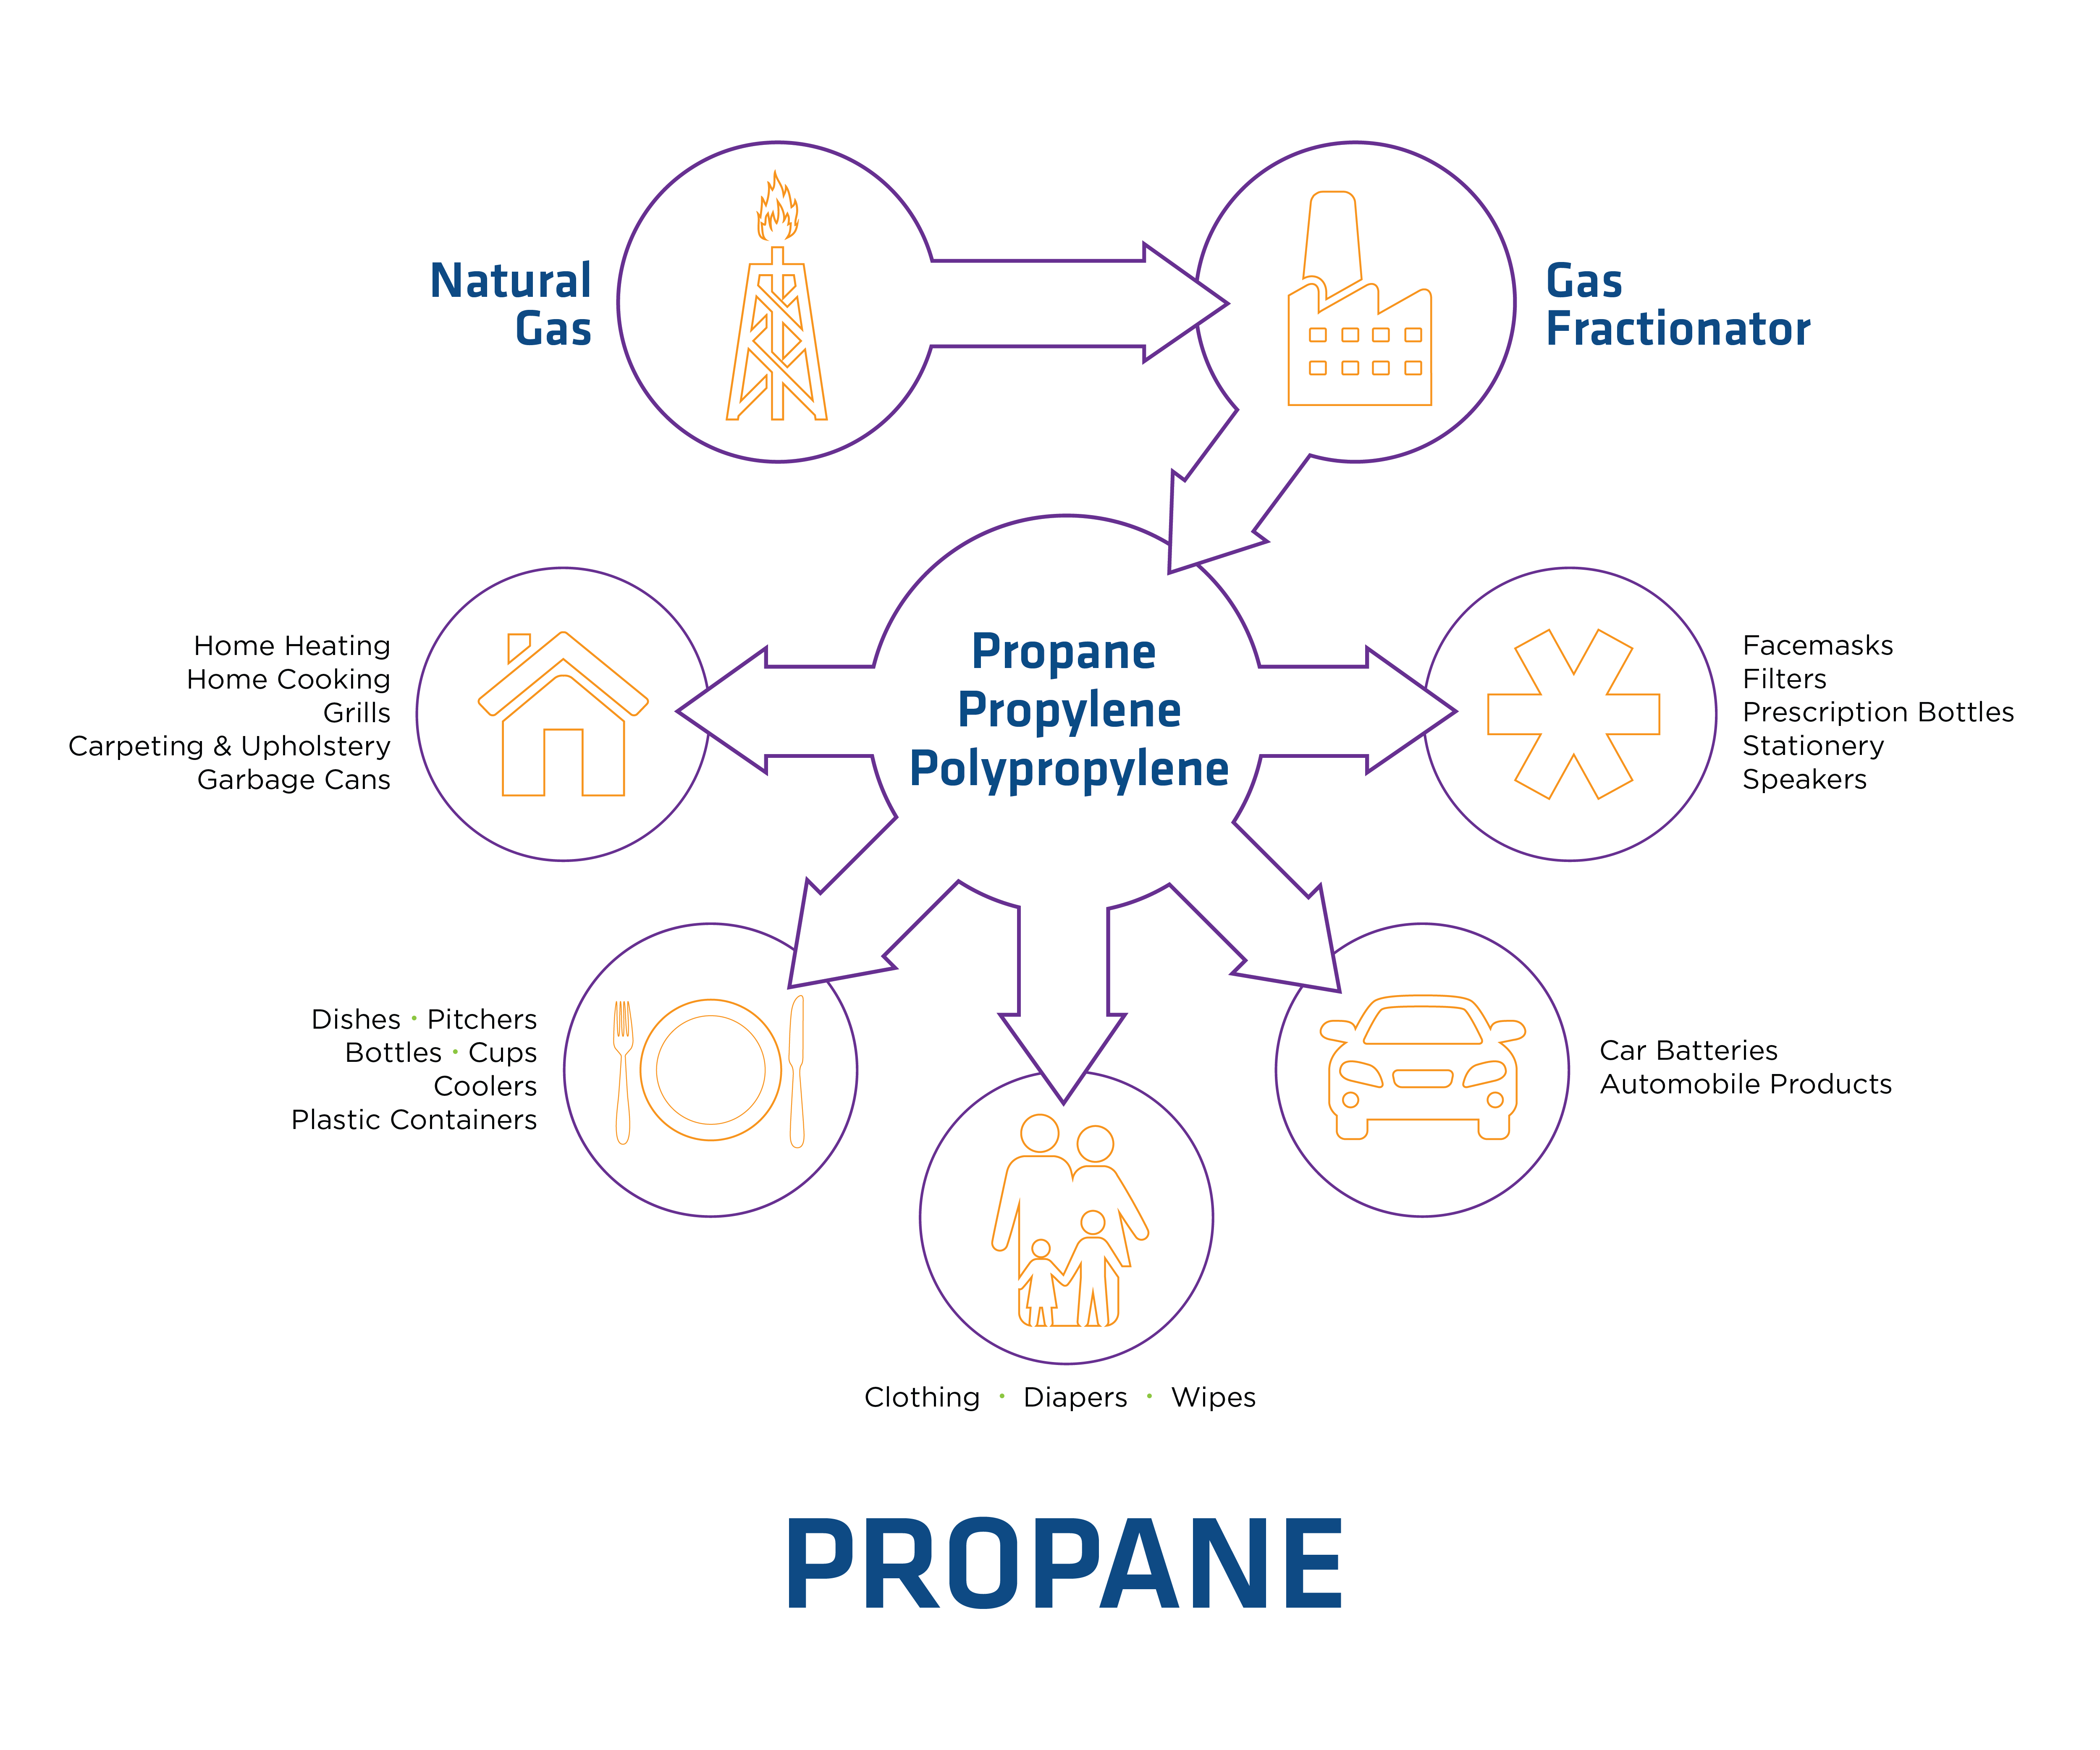 SP20 255250 NatGas Chain Propane 1b - Overview